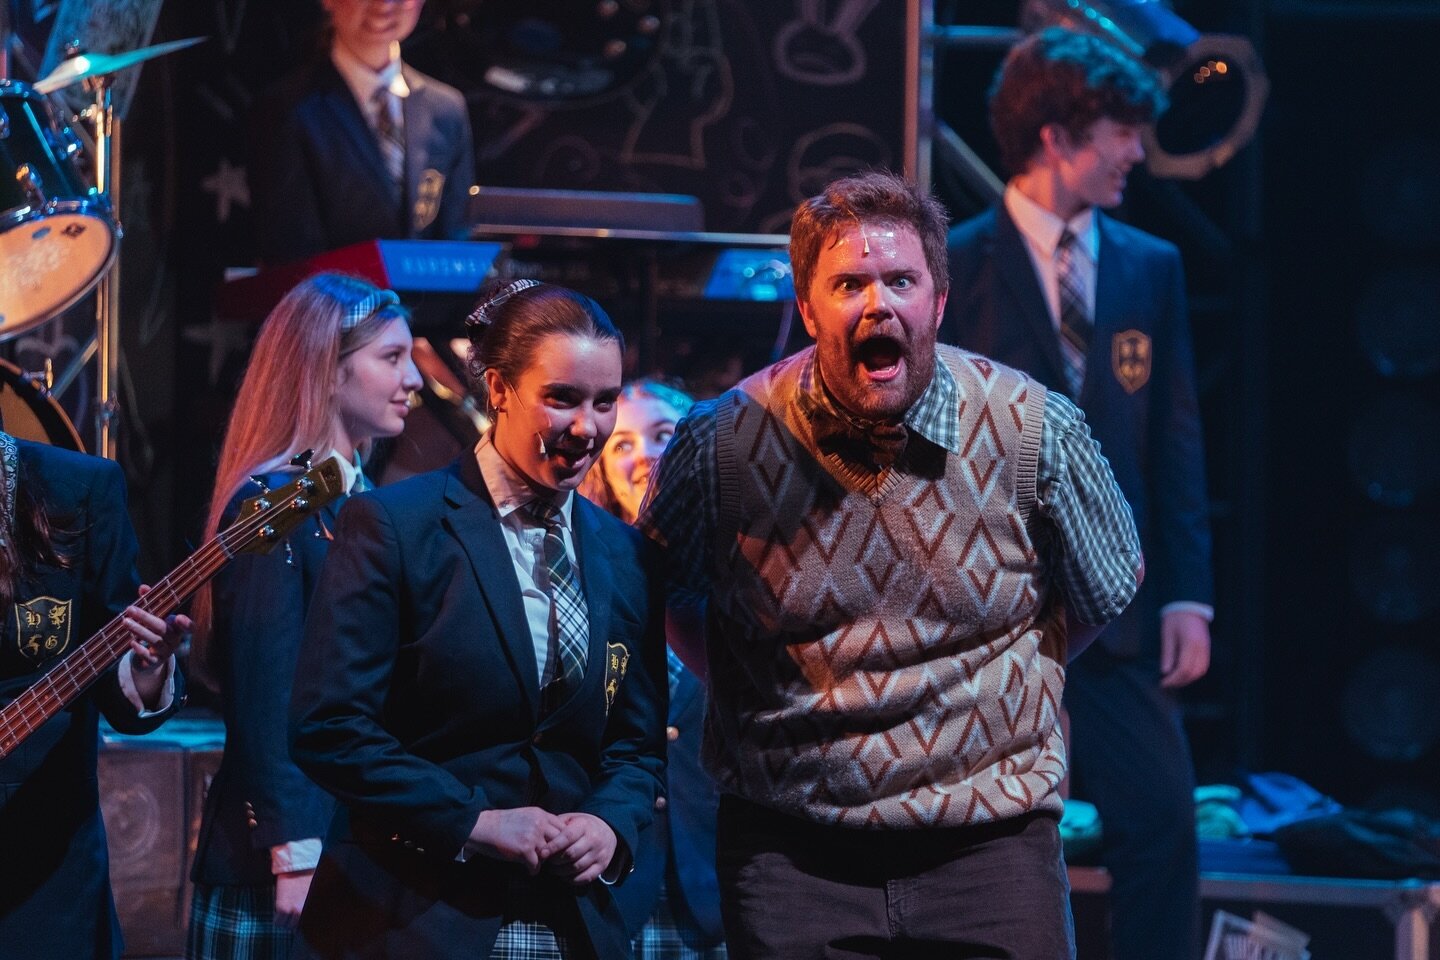 It&rsquo;s a two show day here @themediatheatre come check out School of Rock on @andrewlloydwebber birthday! Happy Bday homie, thanks for a kick ass show.
&bull;
&bull;
&bull;
#schoolofrock
#whatismyface
#amisingingwhoknows
#andrewlloydwebber 

📸: 